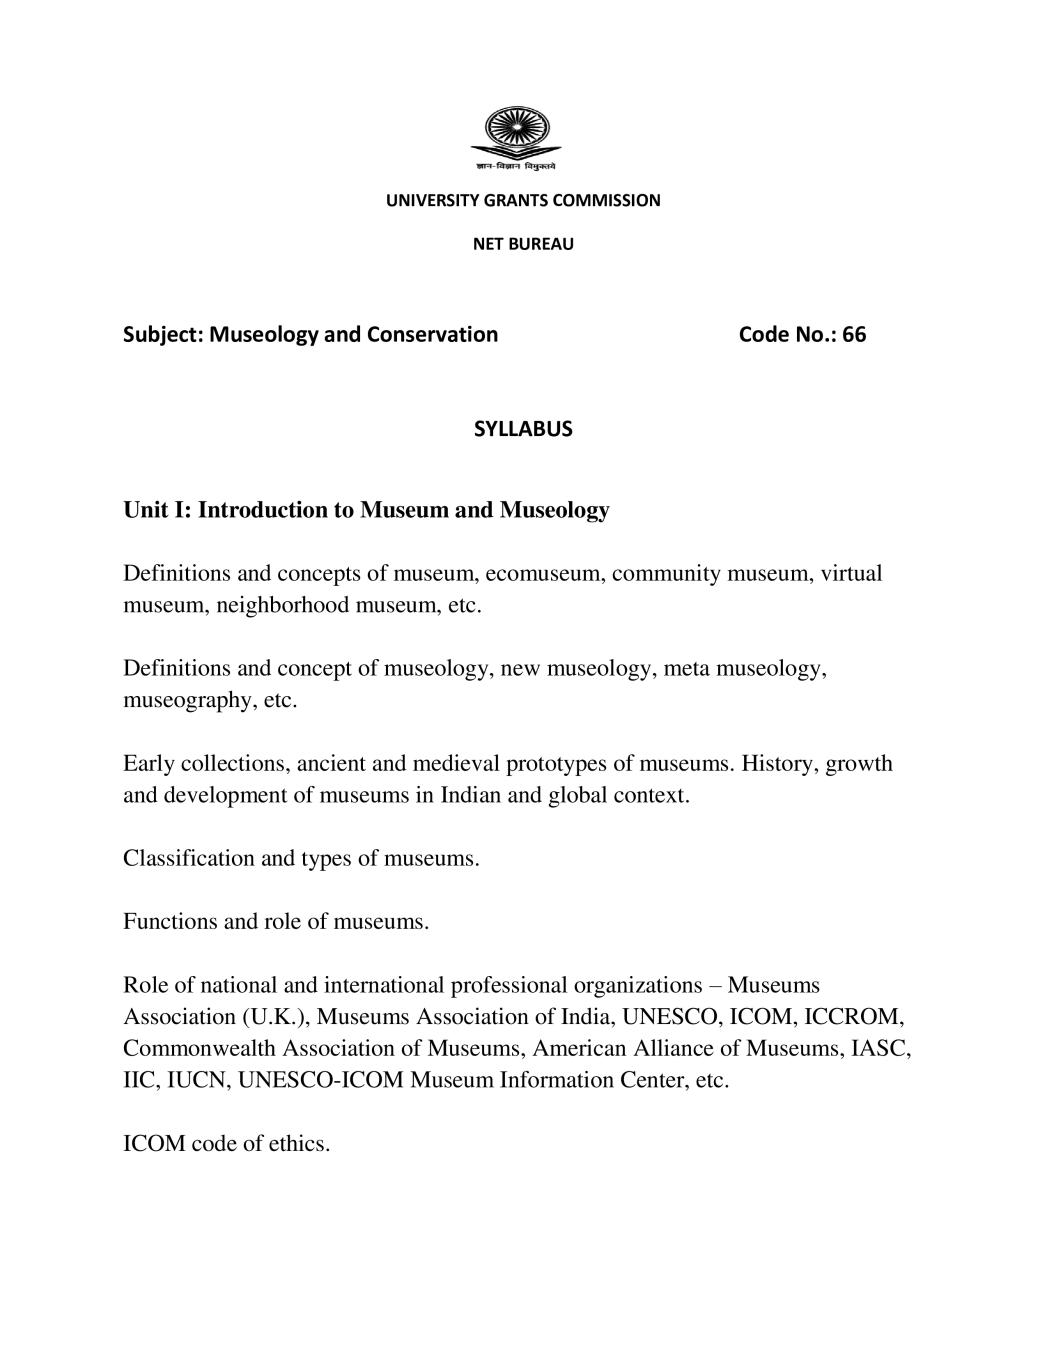 UGC NET Syllabus for Museology and Conservation 2020 - Page 1